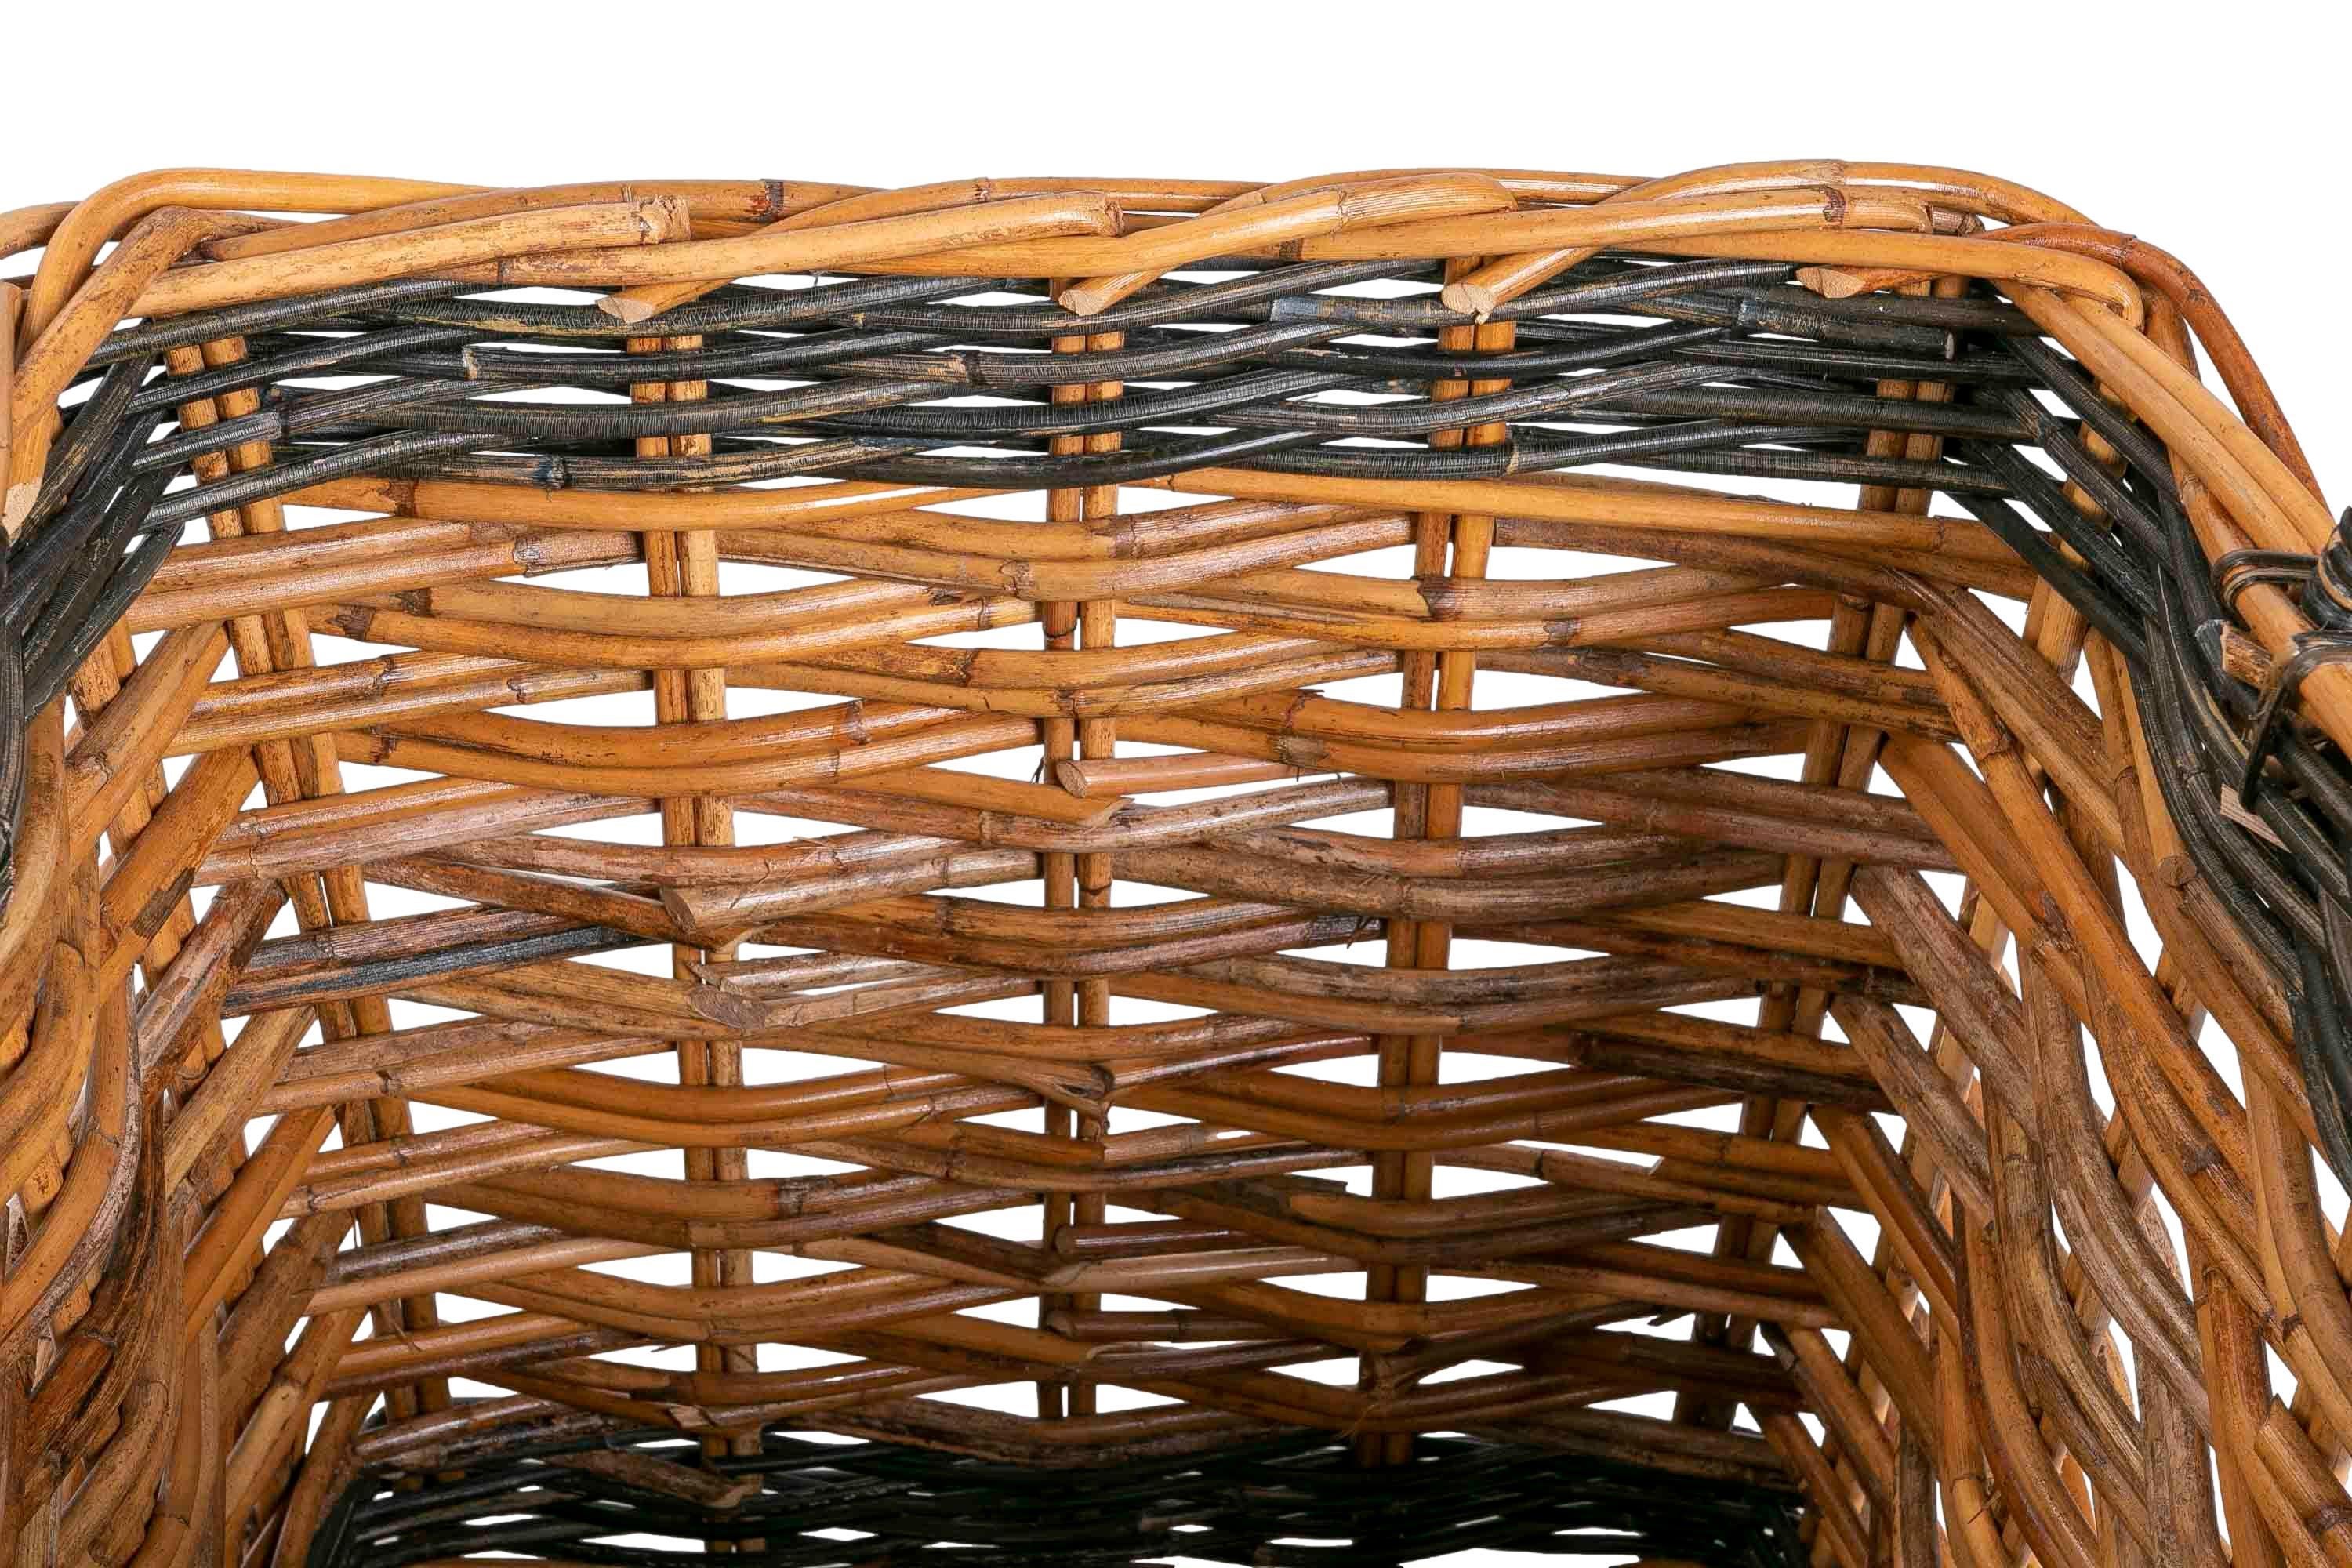 Set Consisting of Three Handmade Wicker Baskets For Sale 6